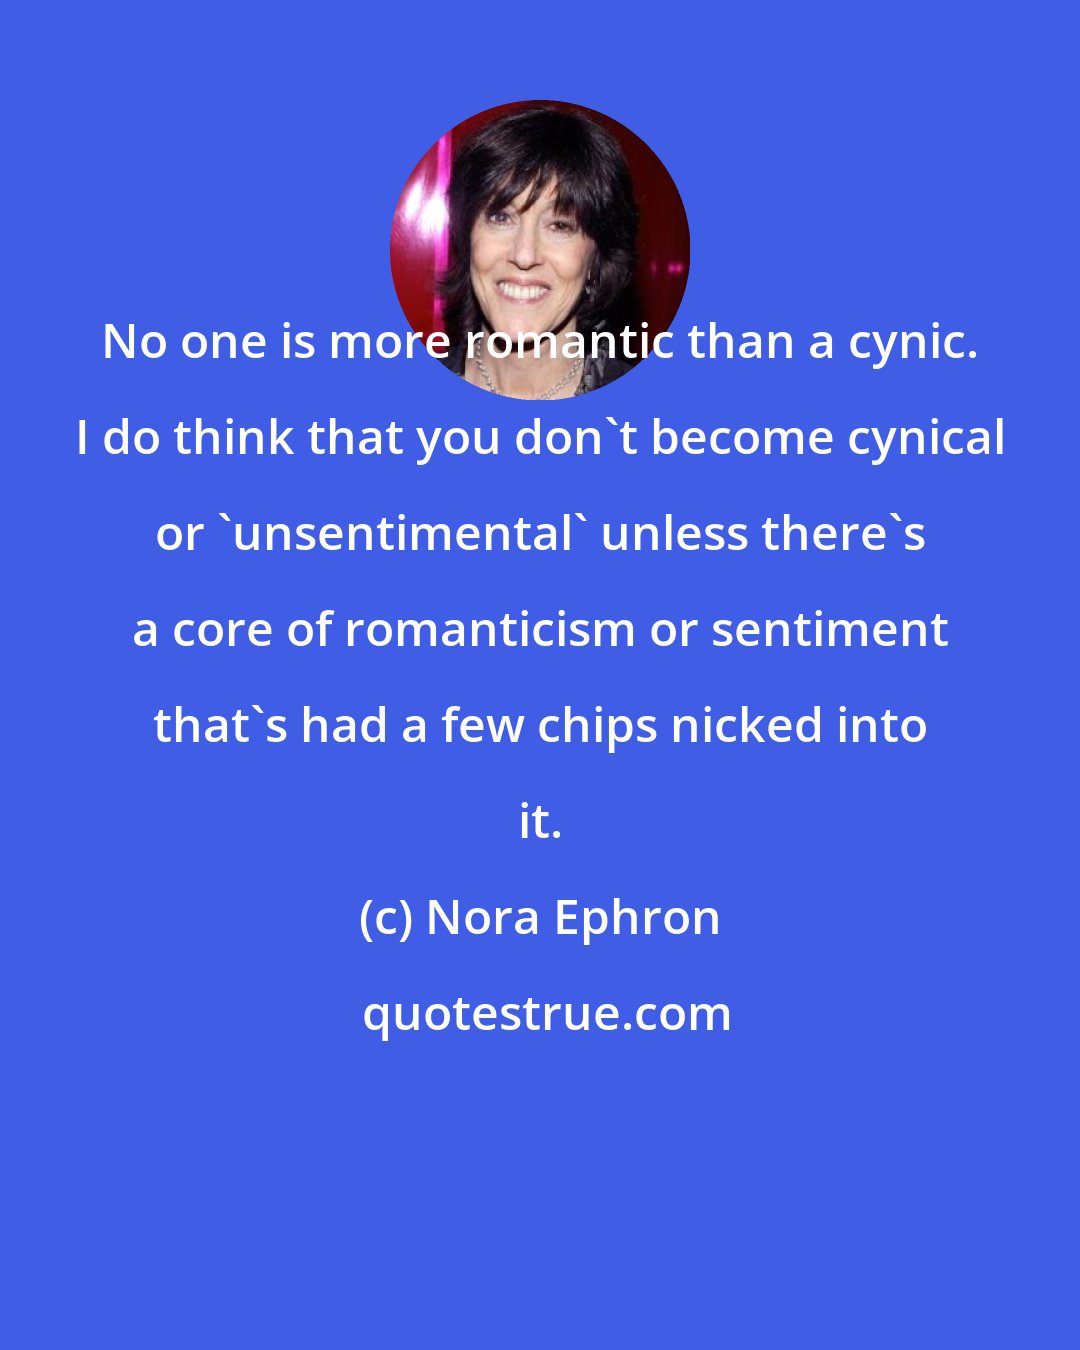 Nora Ephron: No one is more romantic than a cynic. I do think that you don't become cynical or 'unsentimental' unless there's a core of romanticism or sentiment that's had a few chips nicked into it.